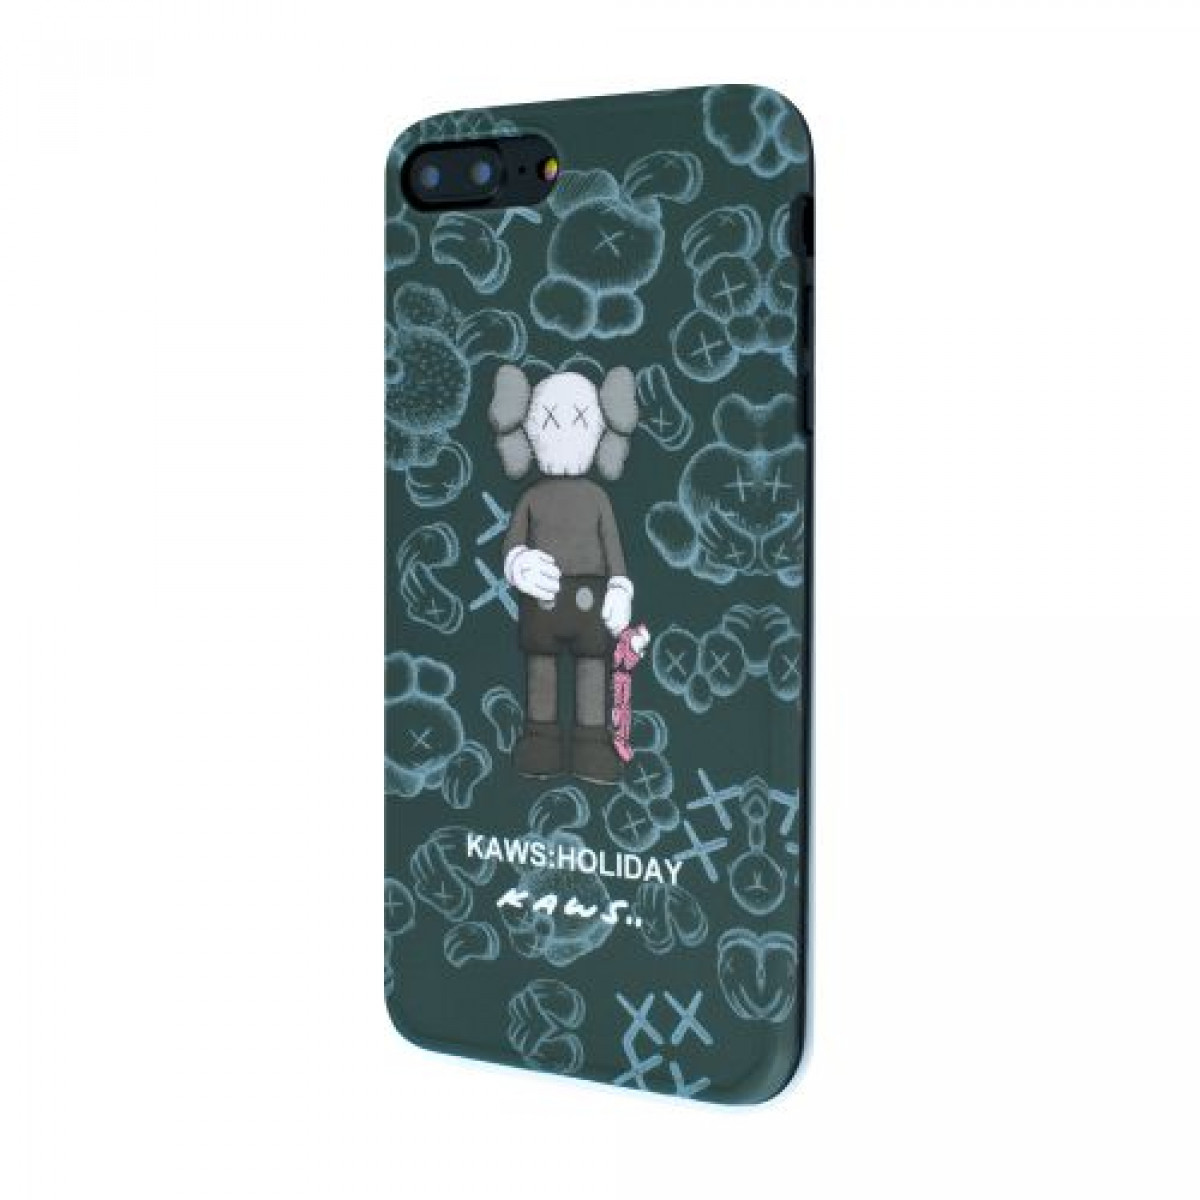 IMD Print Kaws Holiday Case for iPhone 7/8 Plus